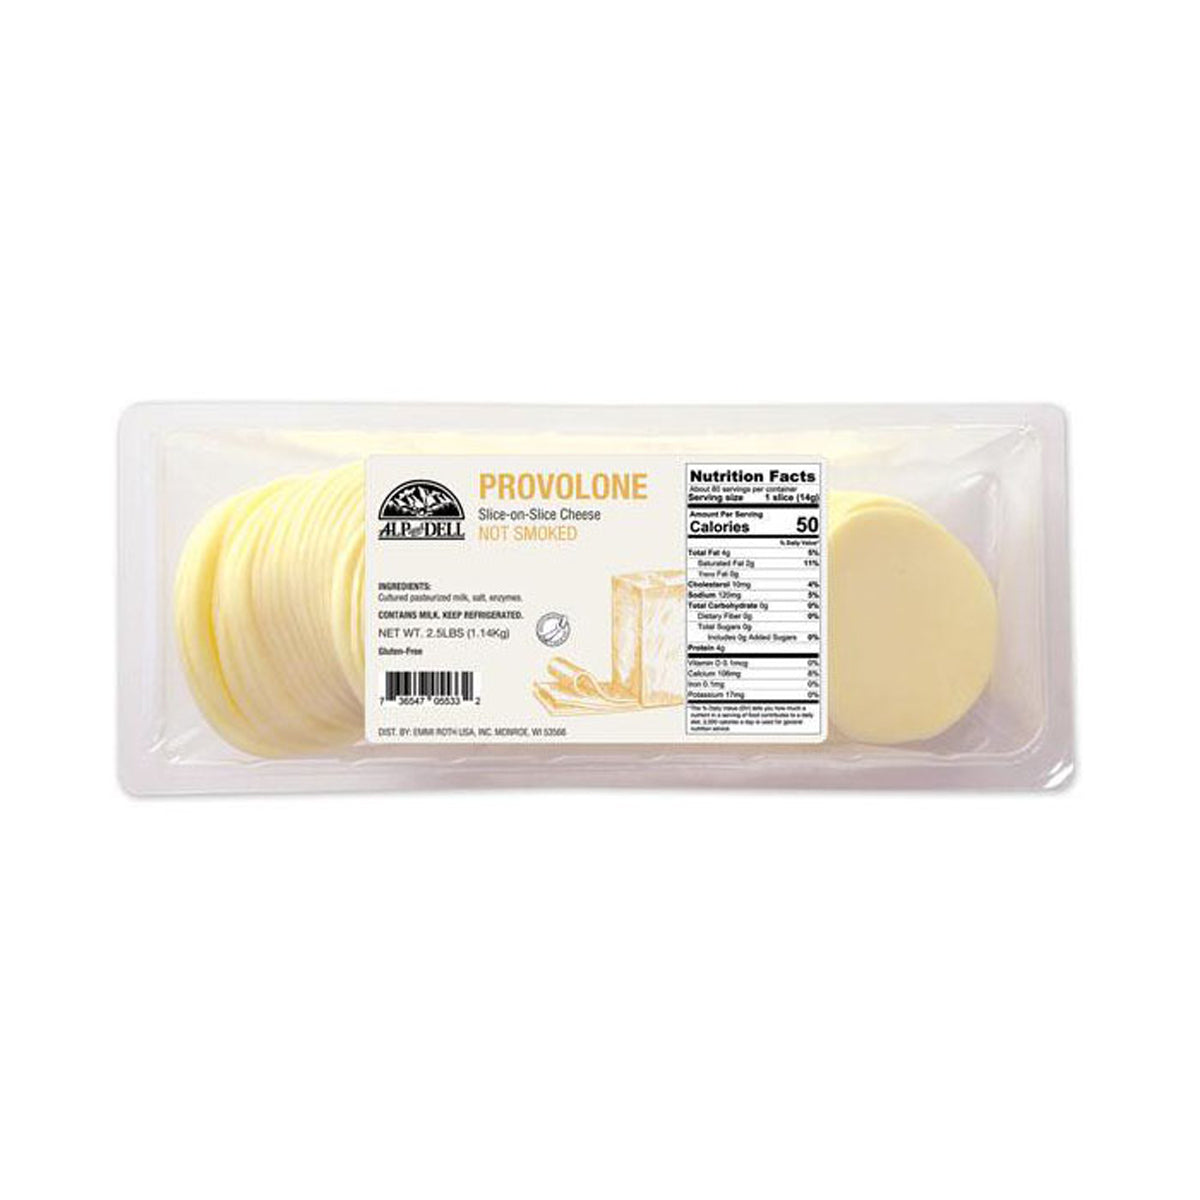 Alp And Dell Sliced Provolone Cheese 2.5 lb Bag